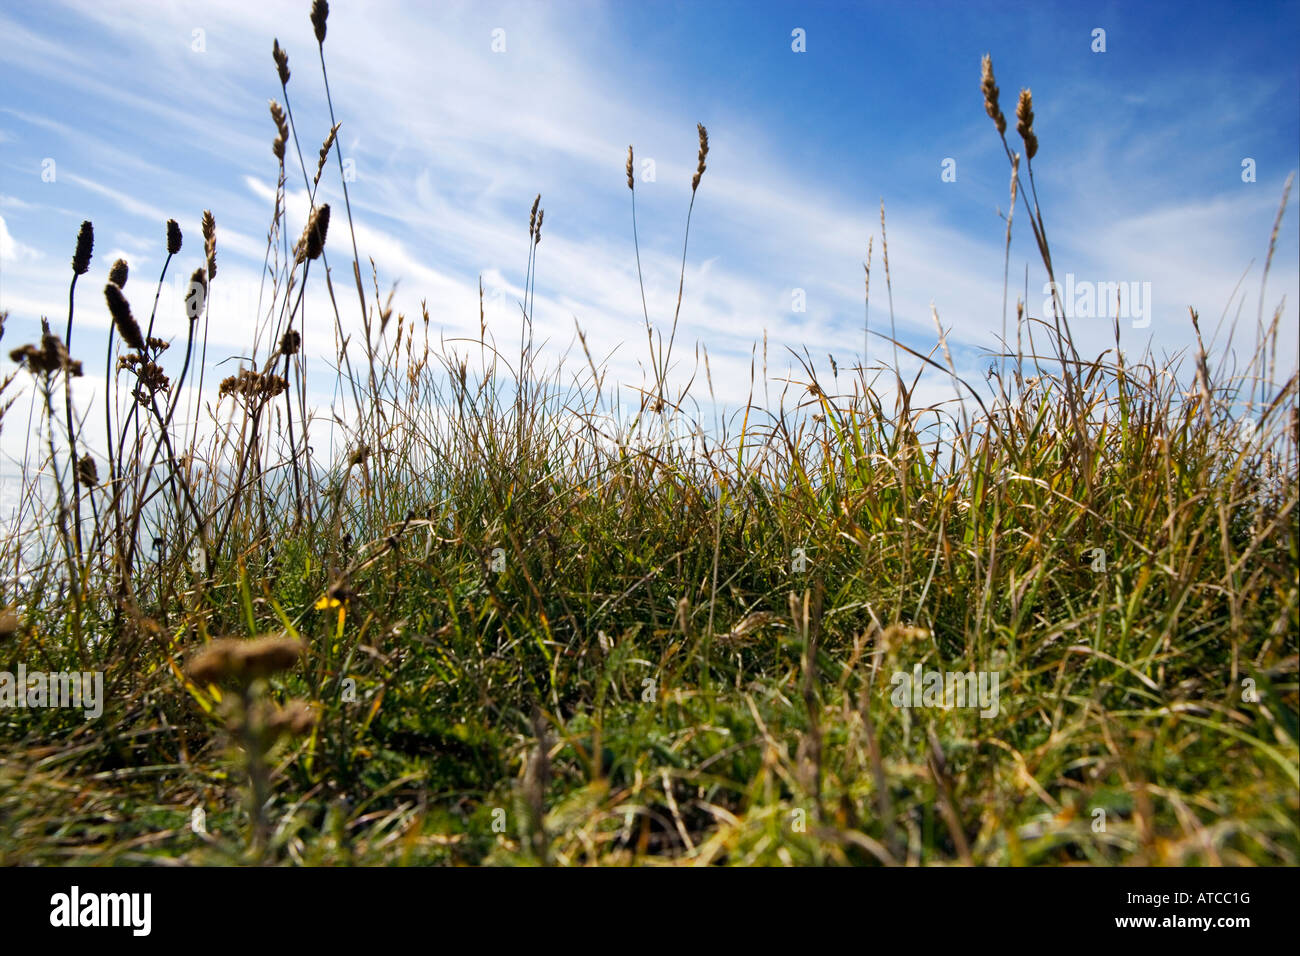 Landscape with tall wild grasses shot in Sussex England UK Stock Photo